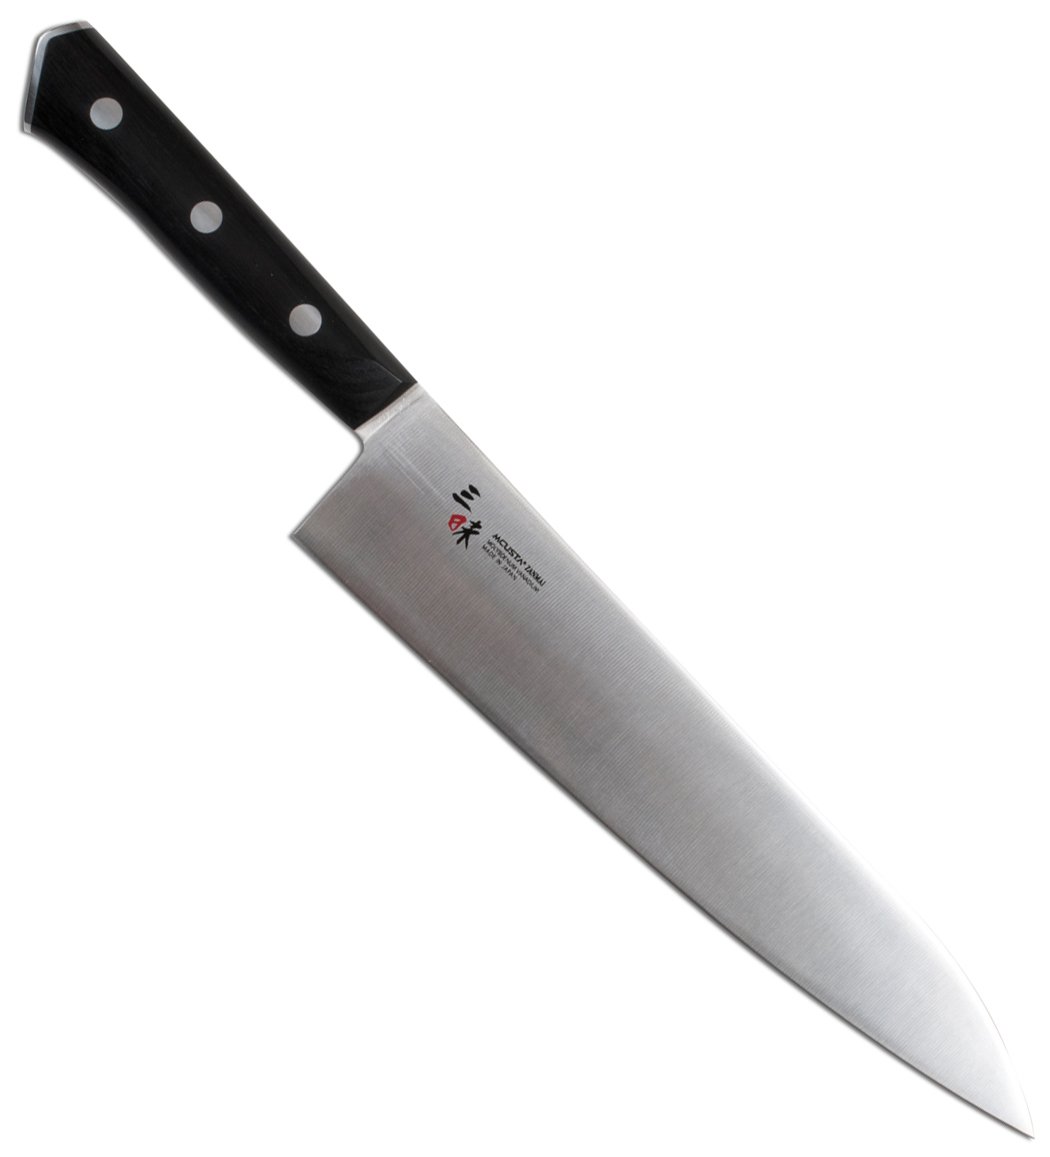  Made In Cookware - 8 Chef Knife France - Full Tang With  Truffle Black Handle: Home & Kitchen